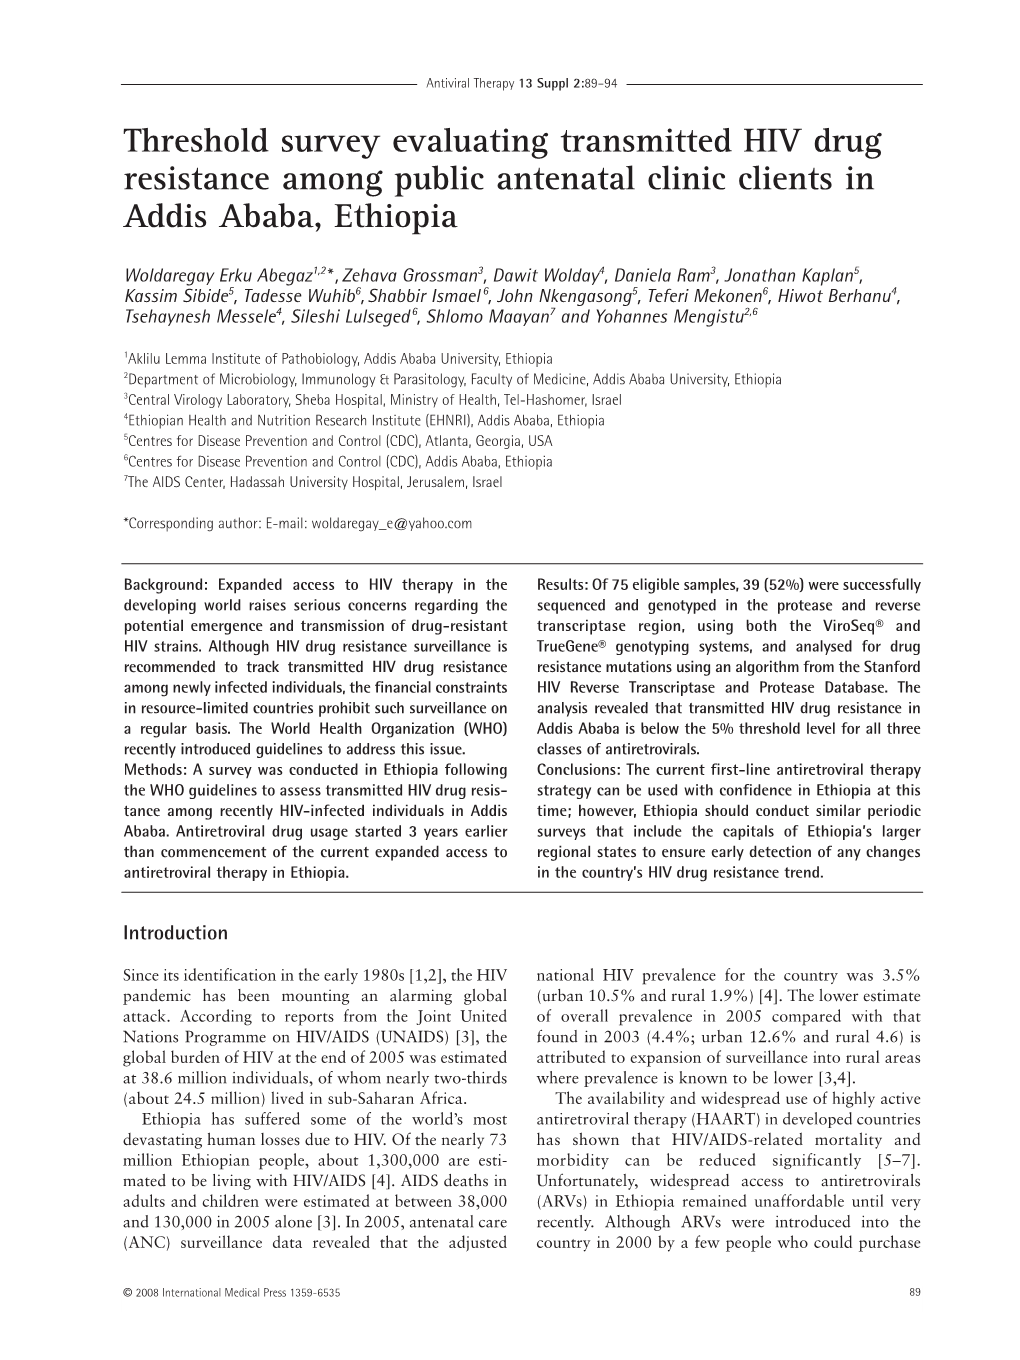 Threshold Survey Evaluating Transmitted HIV Drug Resistance Among Public Antenatal Clinic Clients in Addis Ababa, Ethiopia